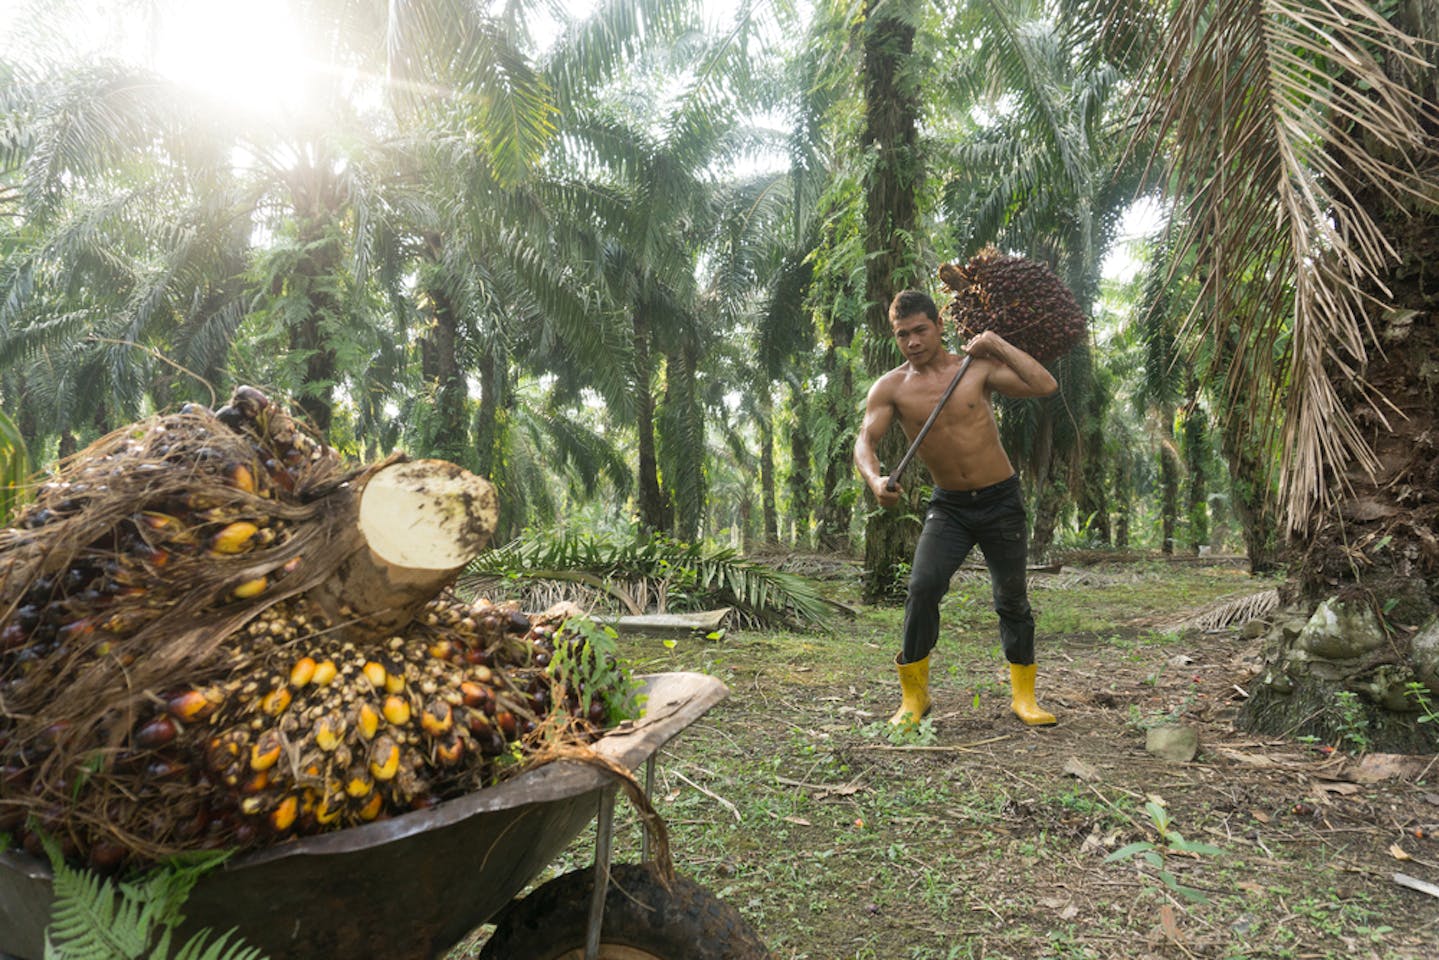 Have we overlooked the human side of palm oil production ...